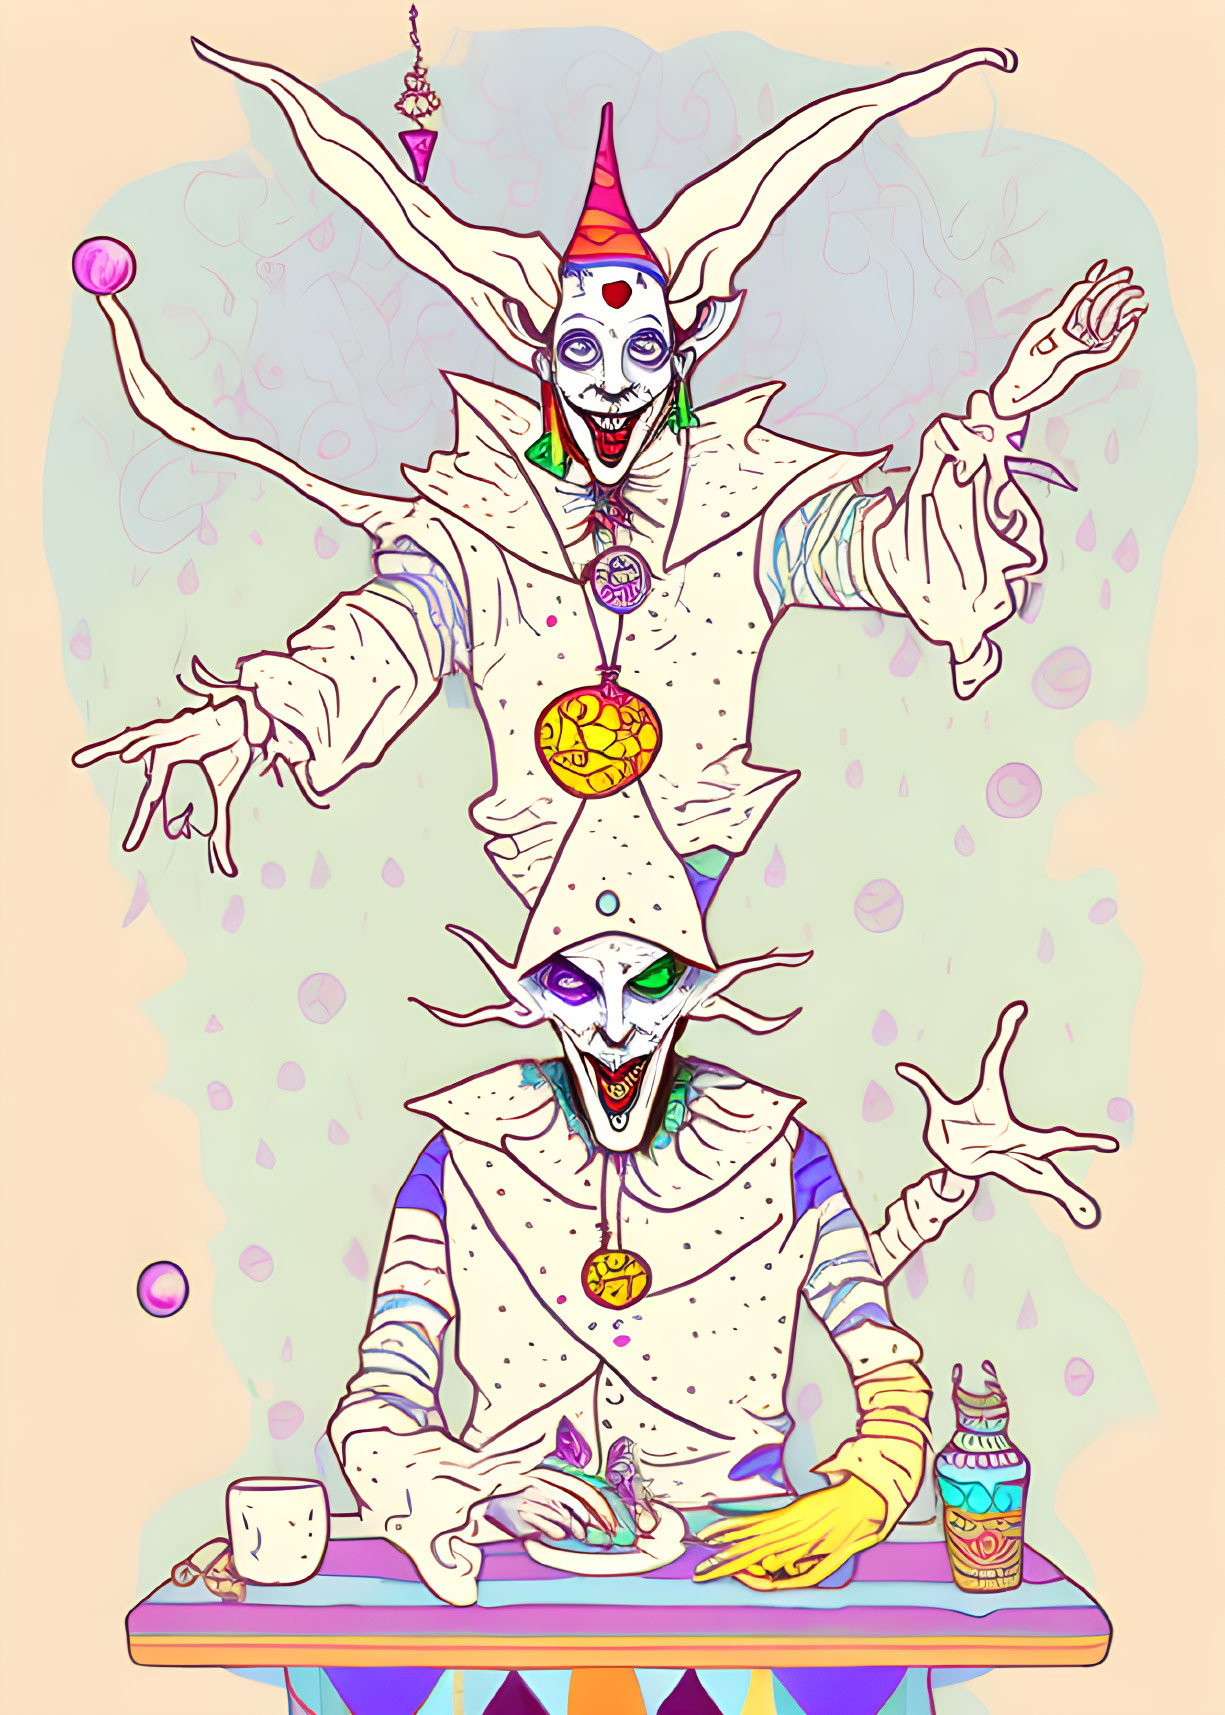 Colorful illustration: Two clowns with elongated limbs in vibrant costumes performing amidst floating orbs and conf